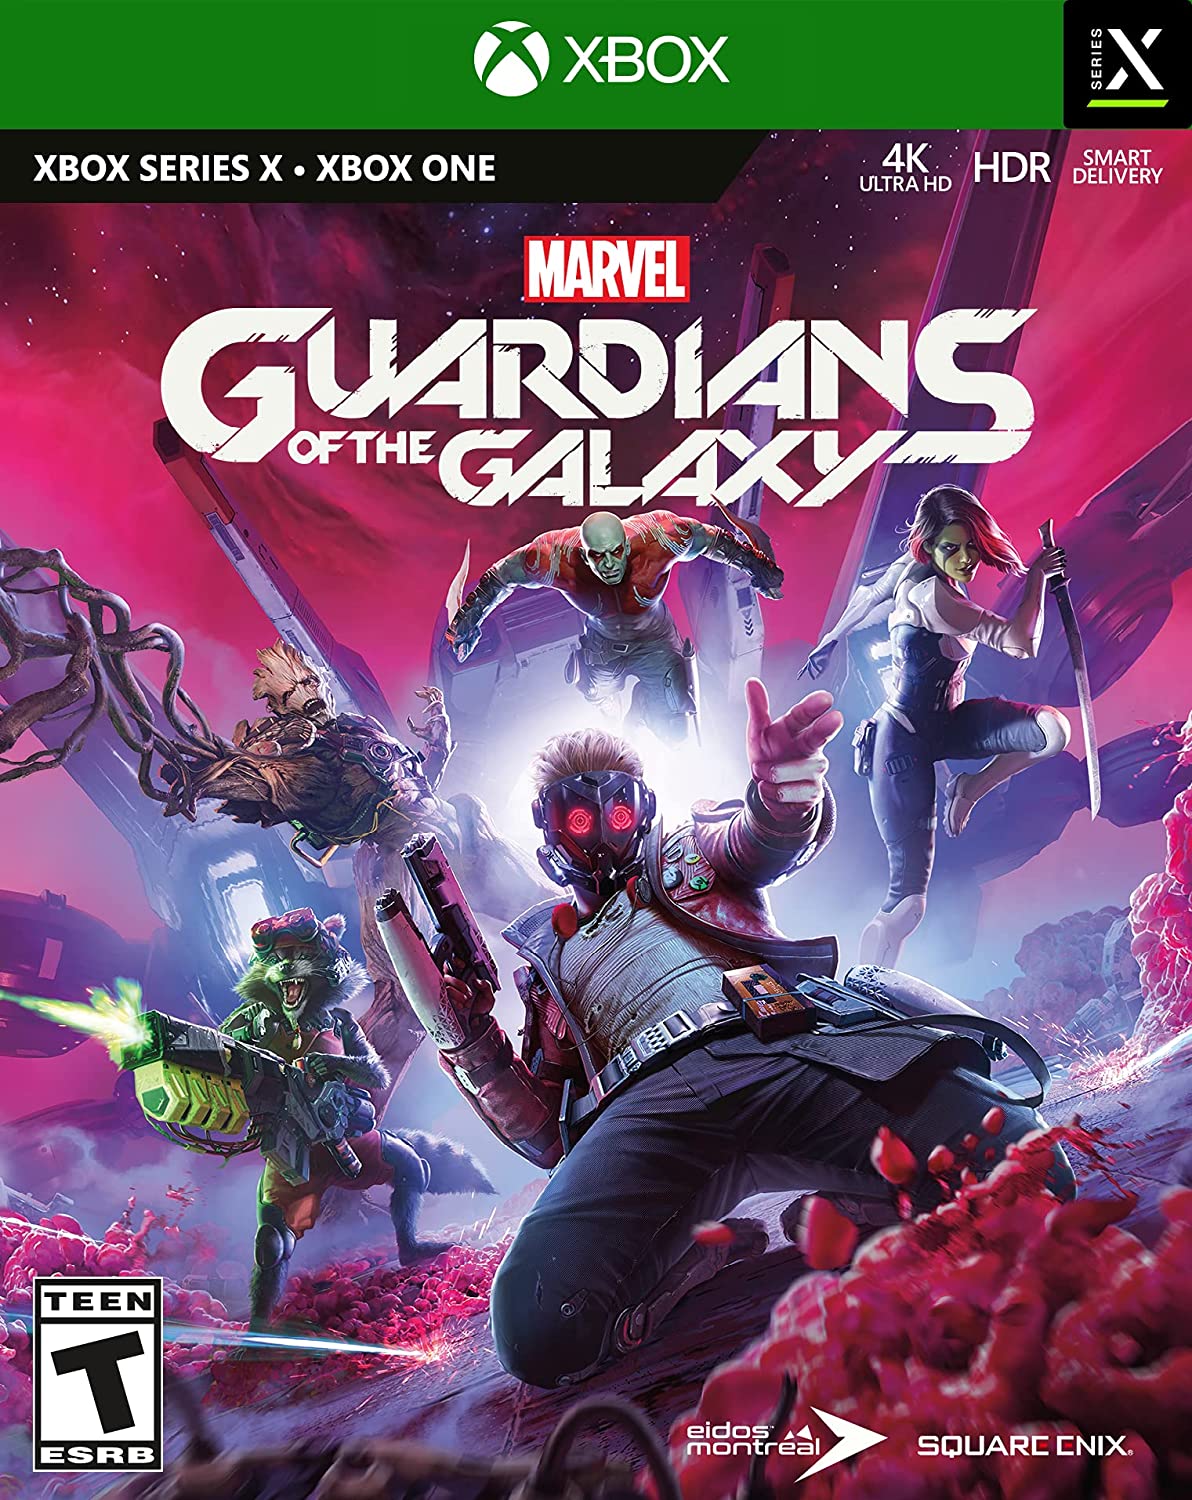 Marvel’s Guardians of the Galaxy - Xbox Series X, Xbox One - image 1 of 5